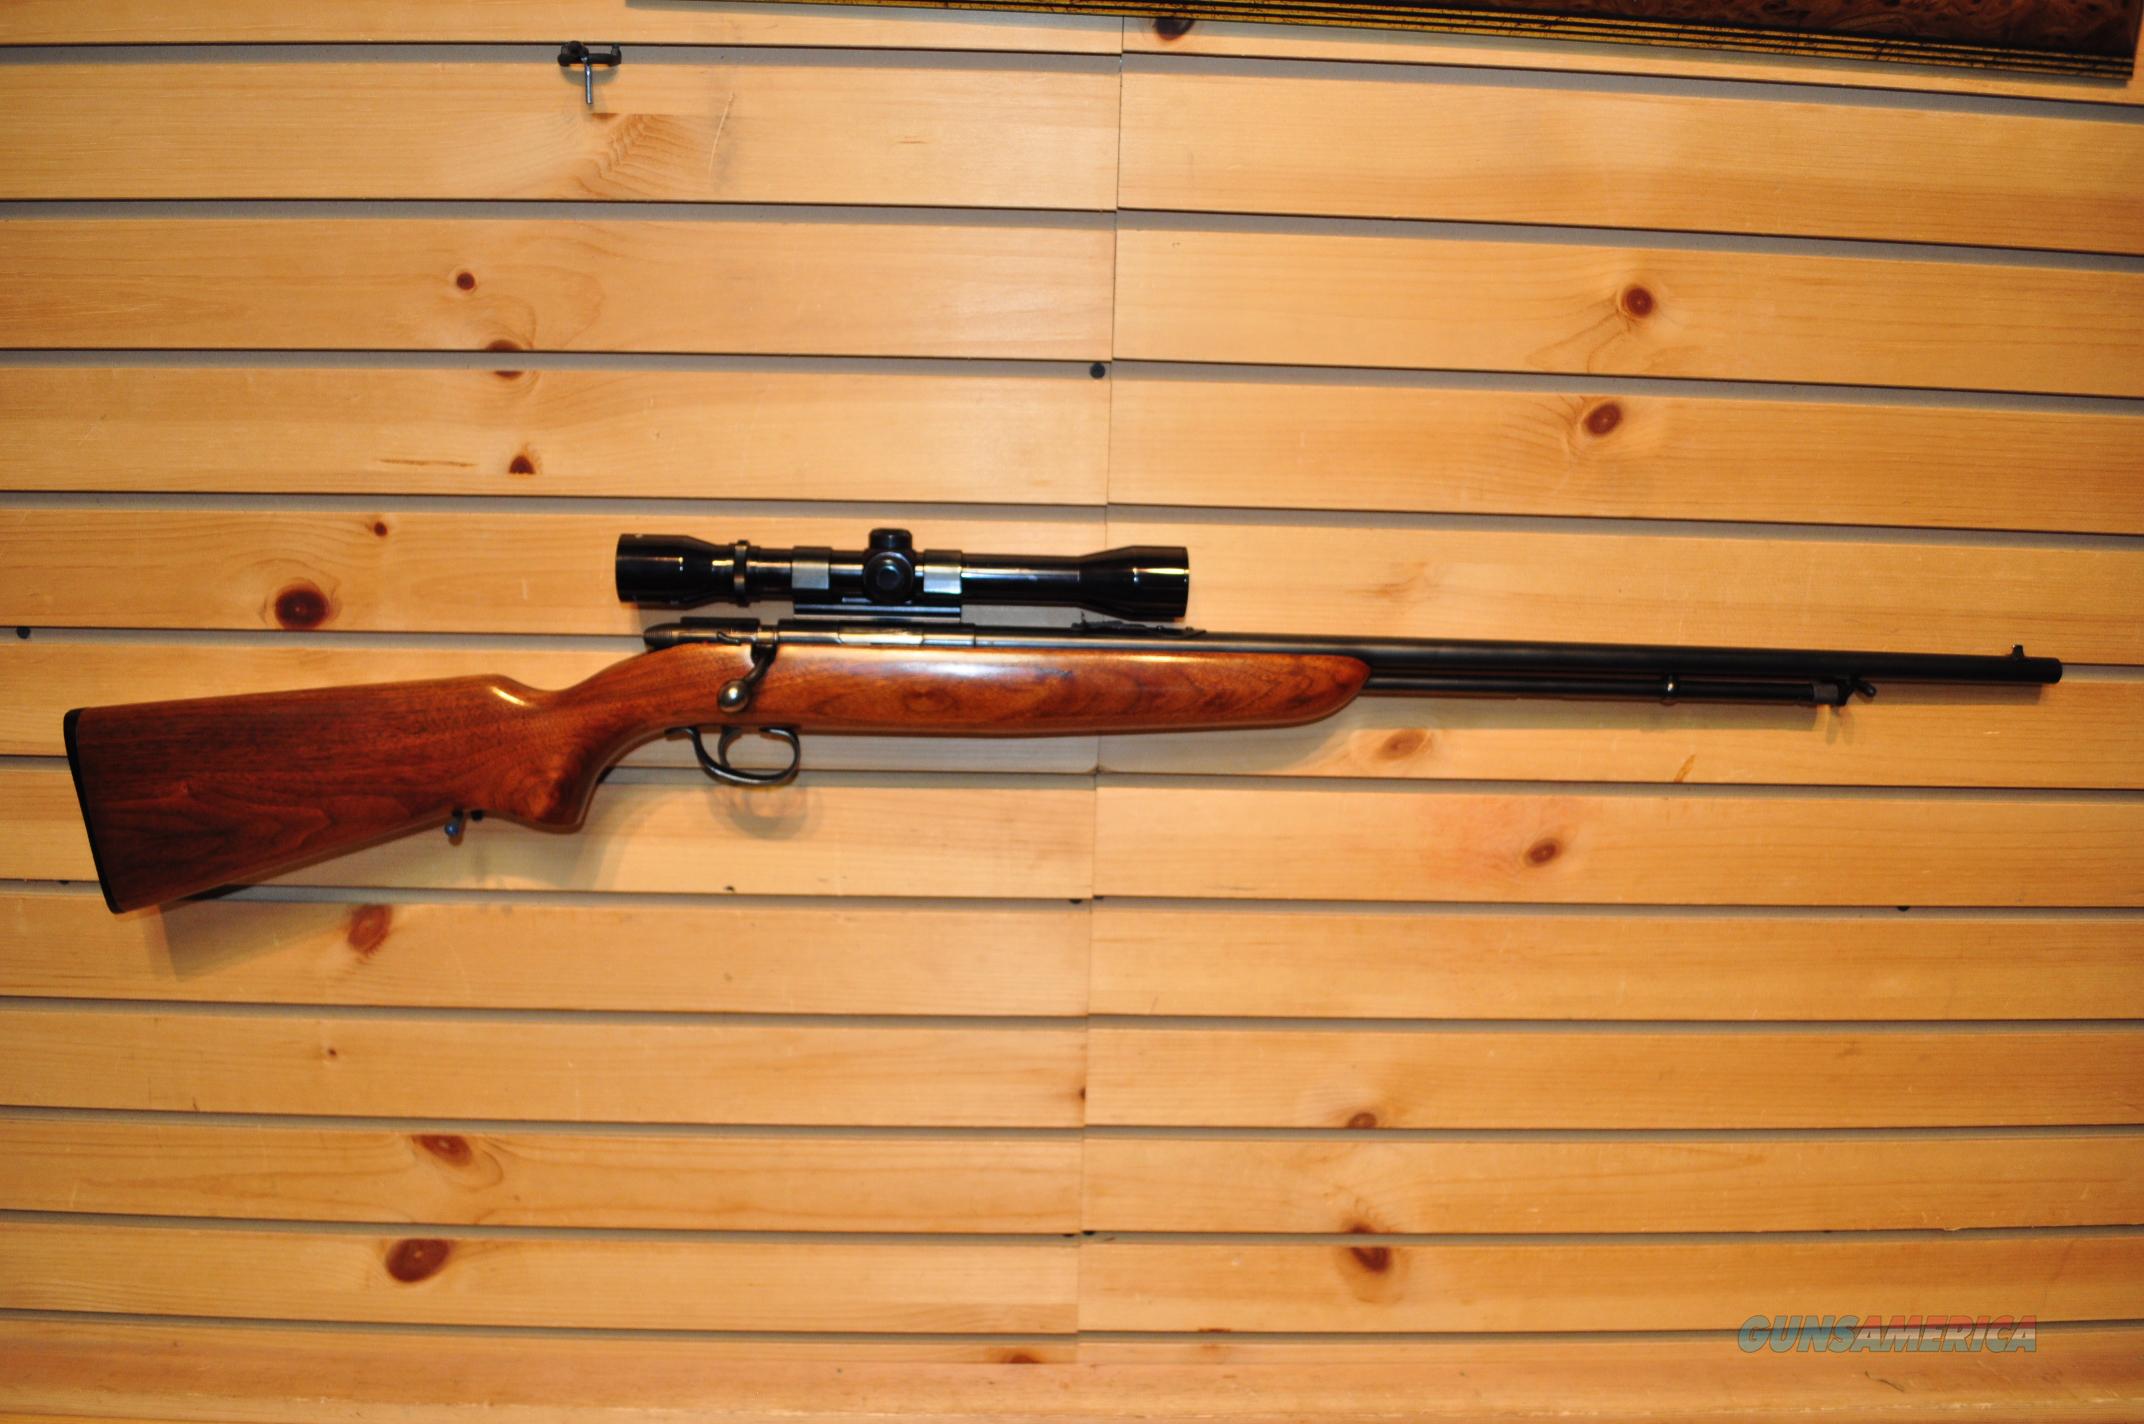 whats the value of a remington sportmaster 512